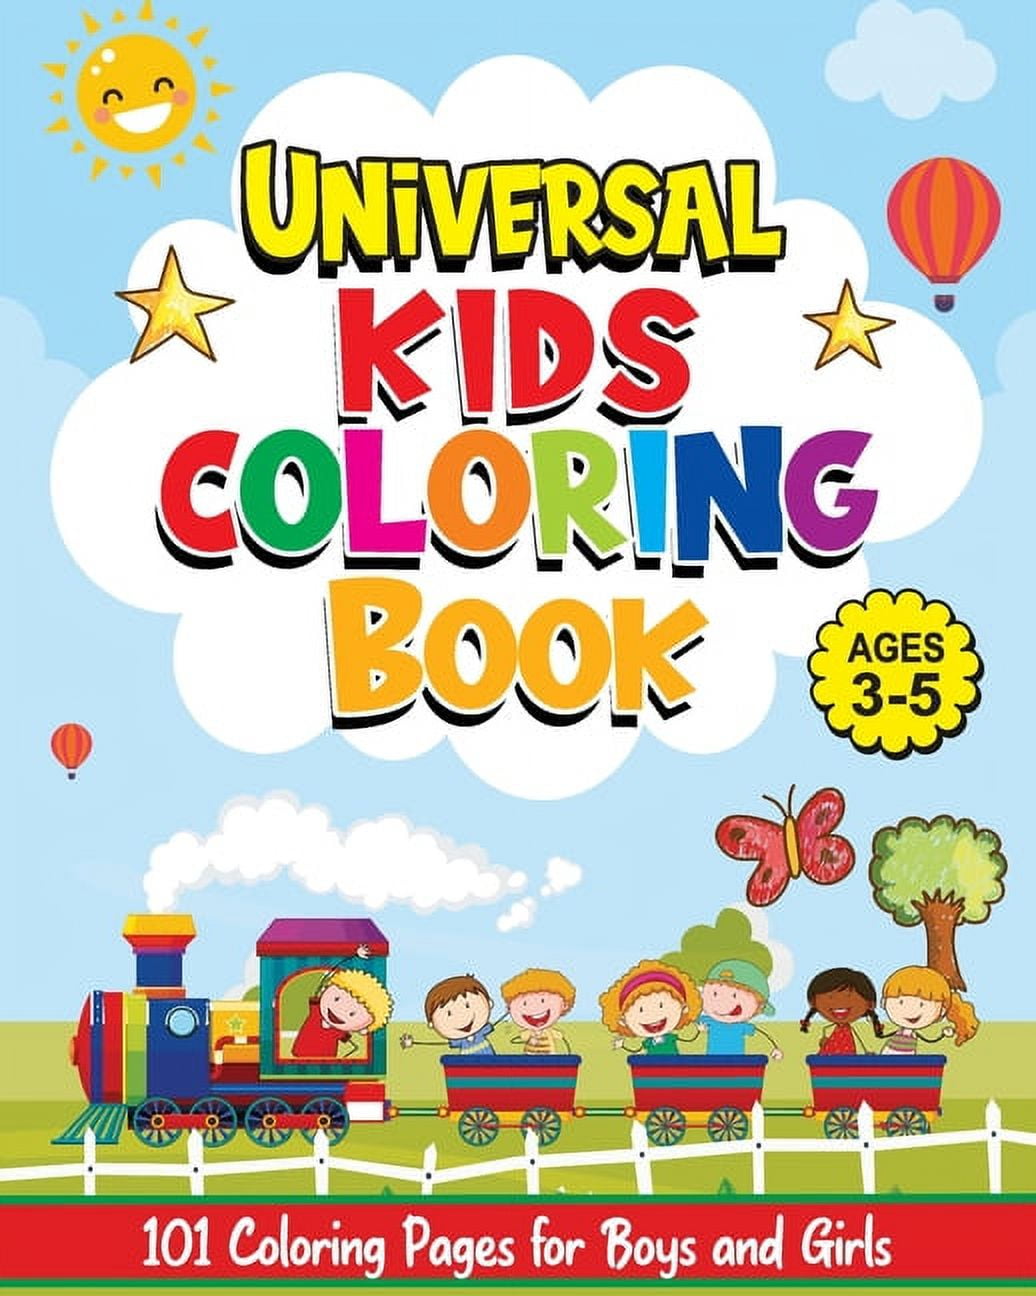 Universal Kids Coloring Book: 101 Coloring Pages for Boys and Girls [Book]